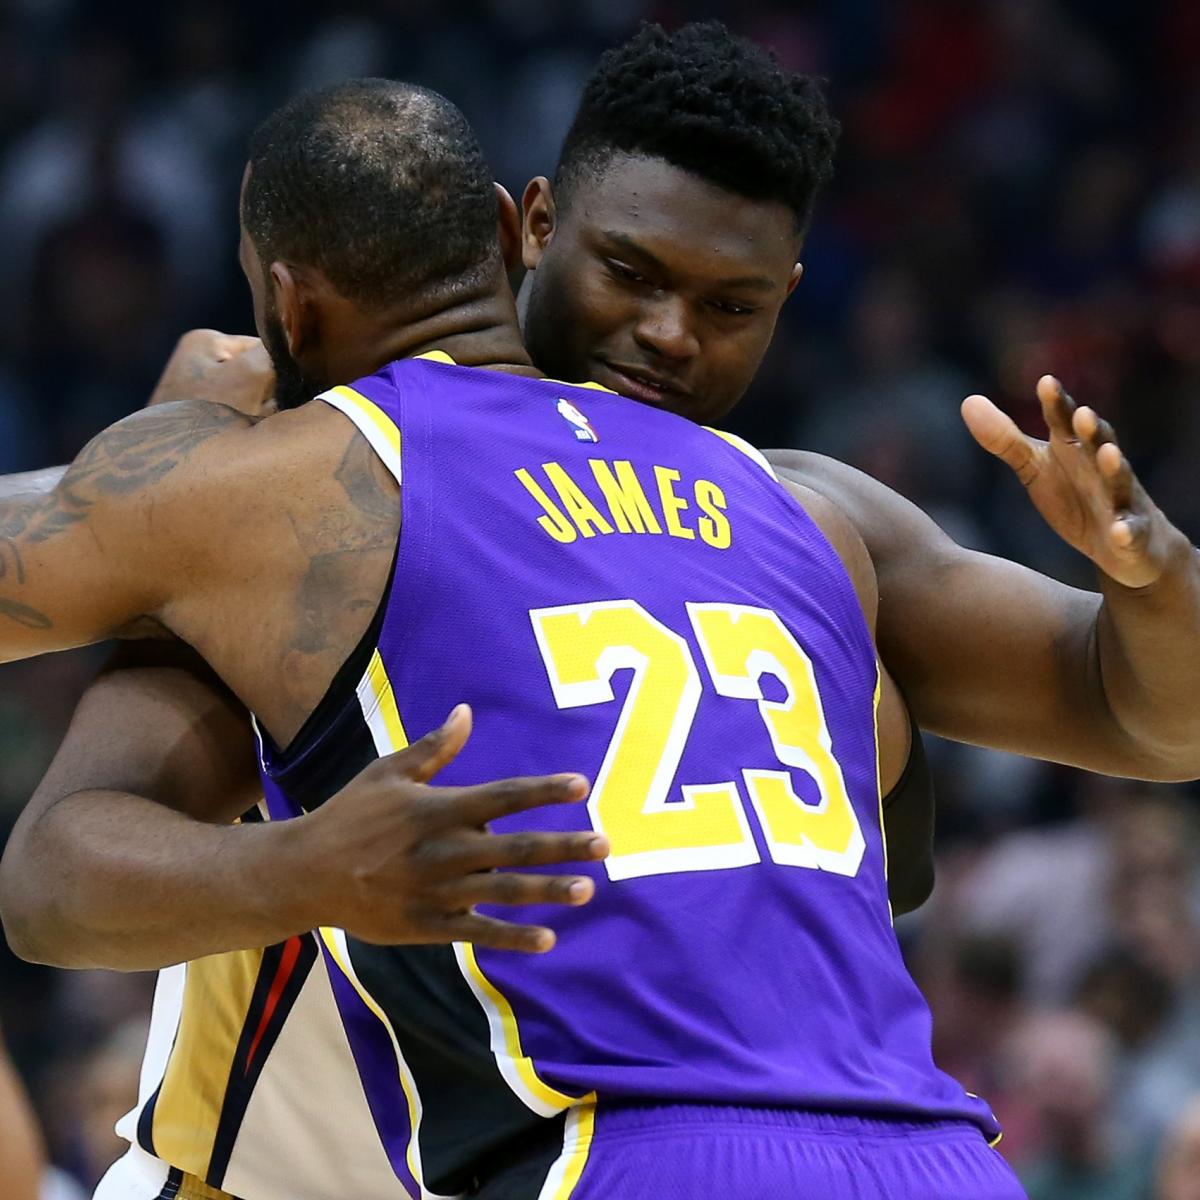 NBA Summer League attracts LeBron James to watch Lakers, Zion Williamson, Basketball